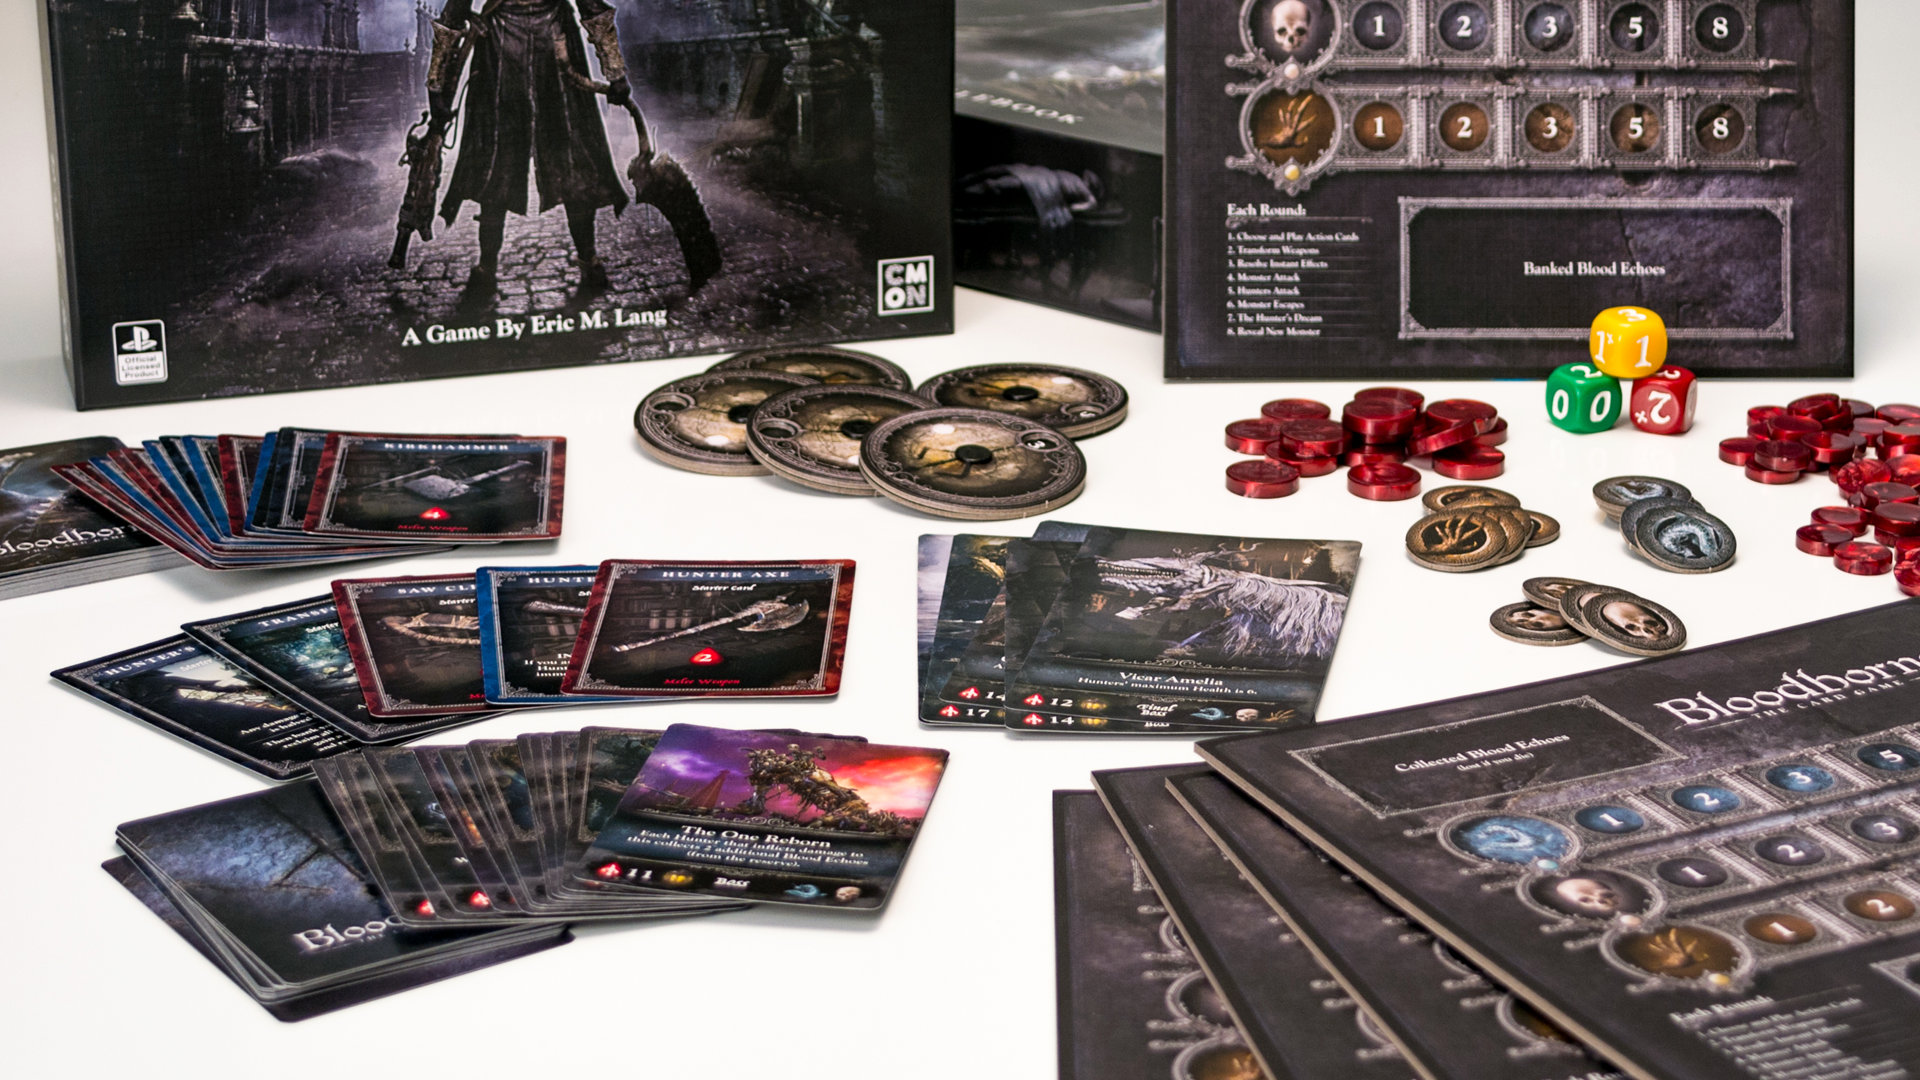 Bloodborne: The Card Game – The Hunter's Nightmare, Board Game